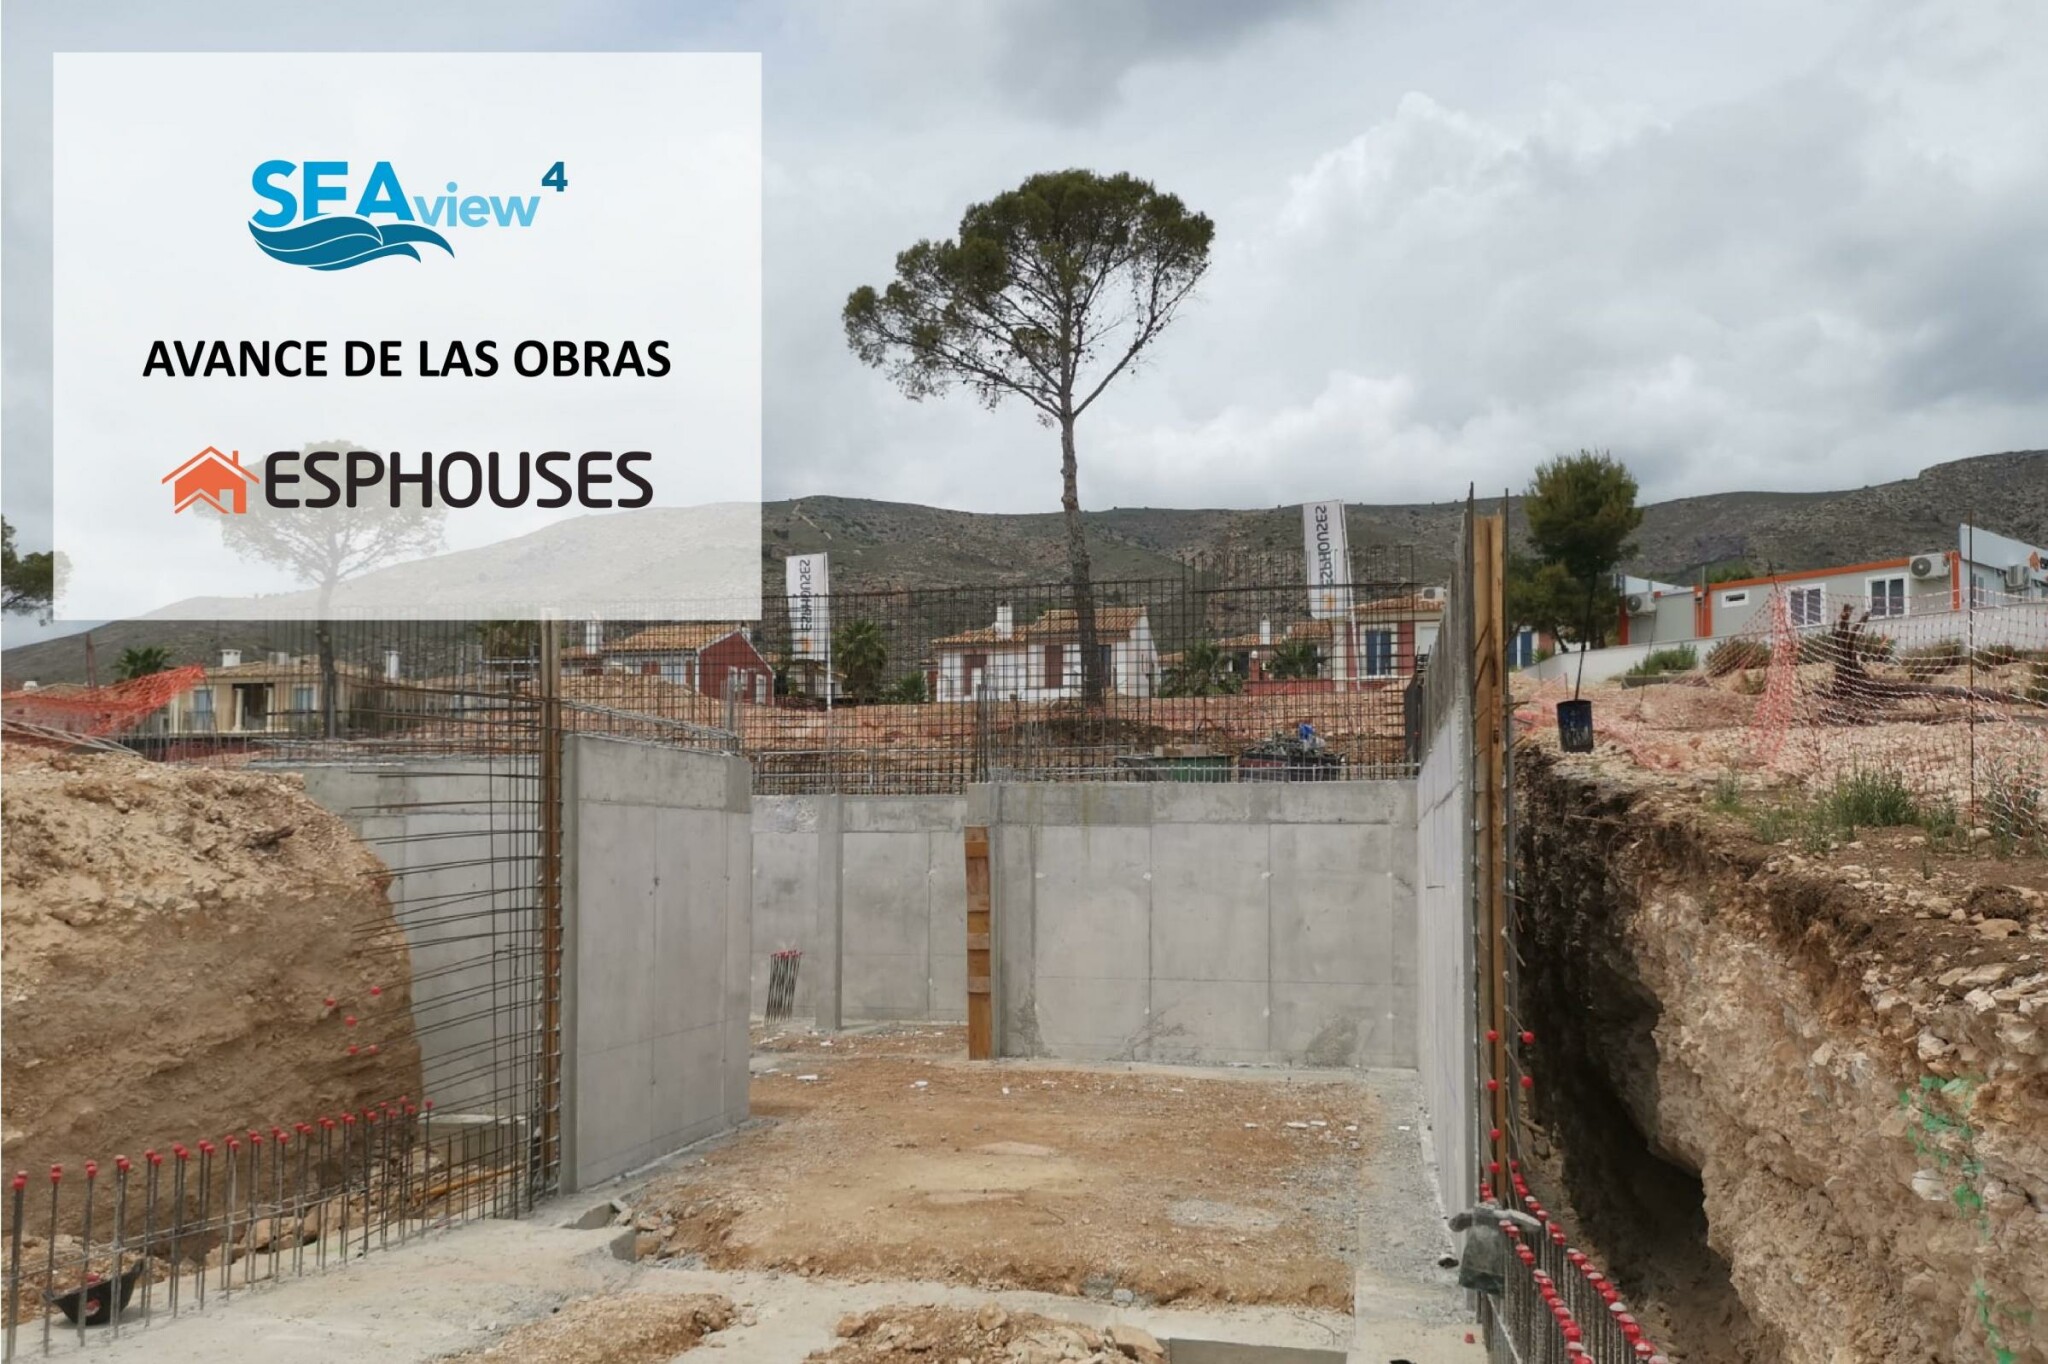 SEAVIEW 4 - Construction continues on these villas in Sierra Cortina